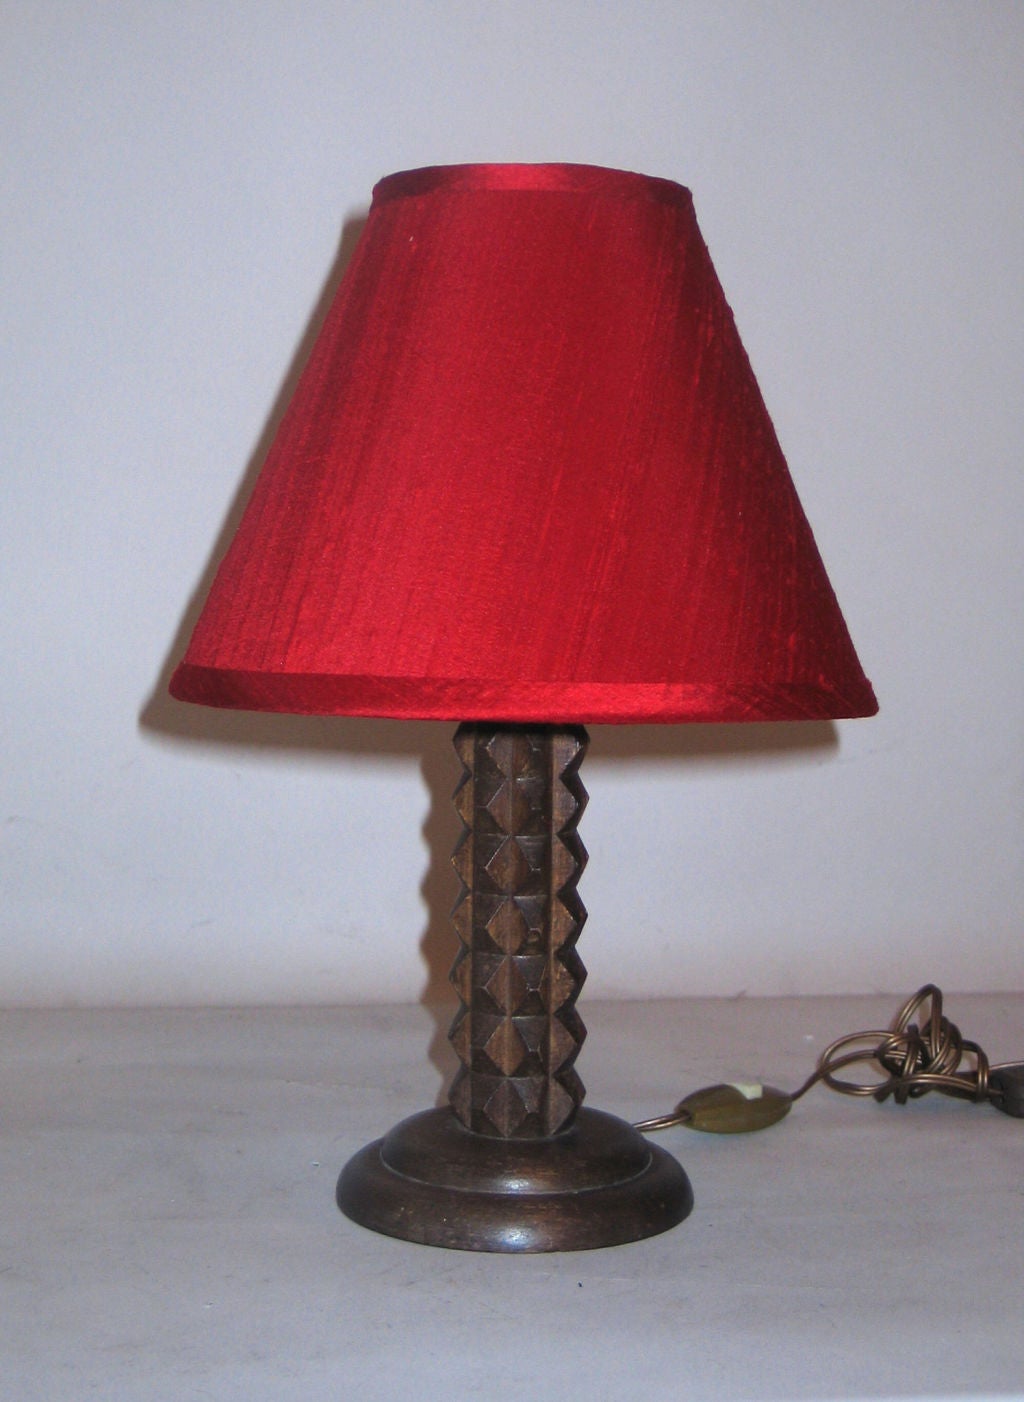 Pair of French, Louis XIII style lamps from the 1940 Period hand-carved in a Chevron Pattern and shown with a red silk shade. Ideal for a nightstand or a console. 

Shades are for demonstration only. Shade dimensions shown are: H 7" x Top D